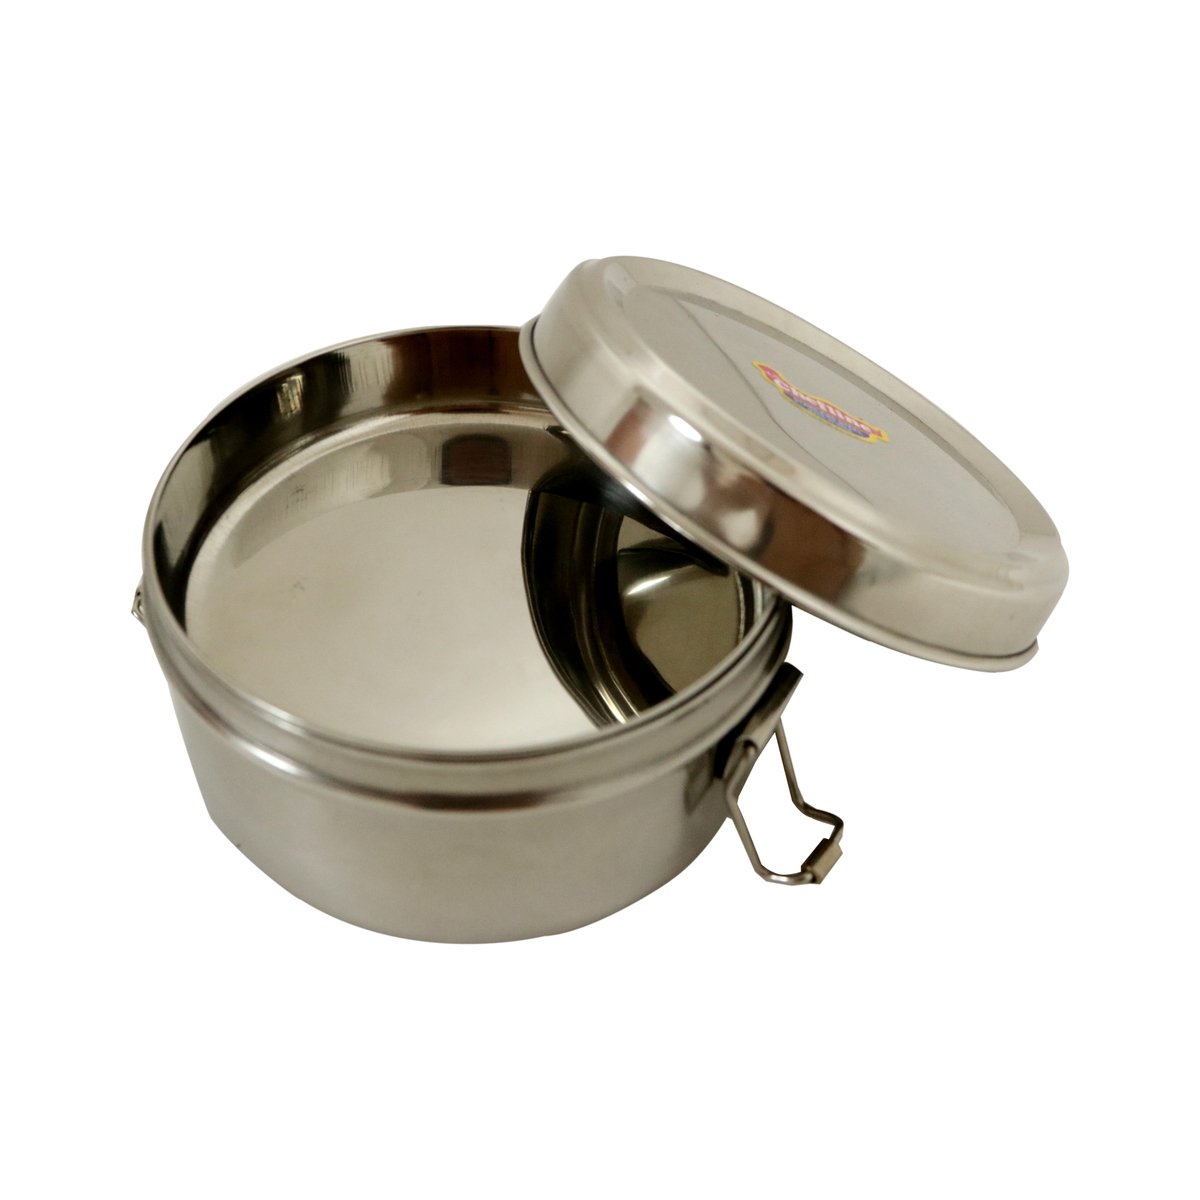 Chefline Stainless Steel Lunch Box 03 Induction